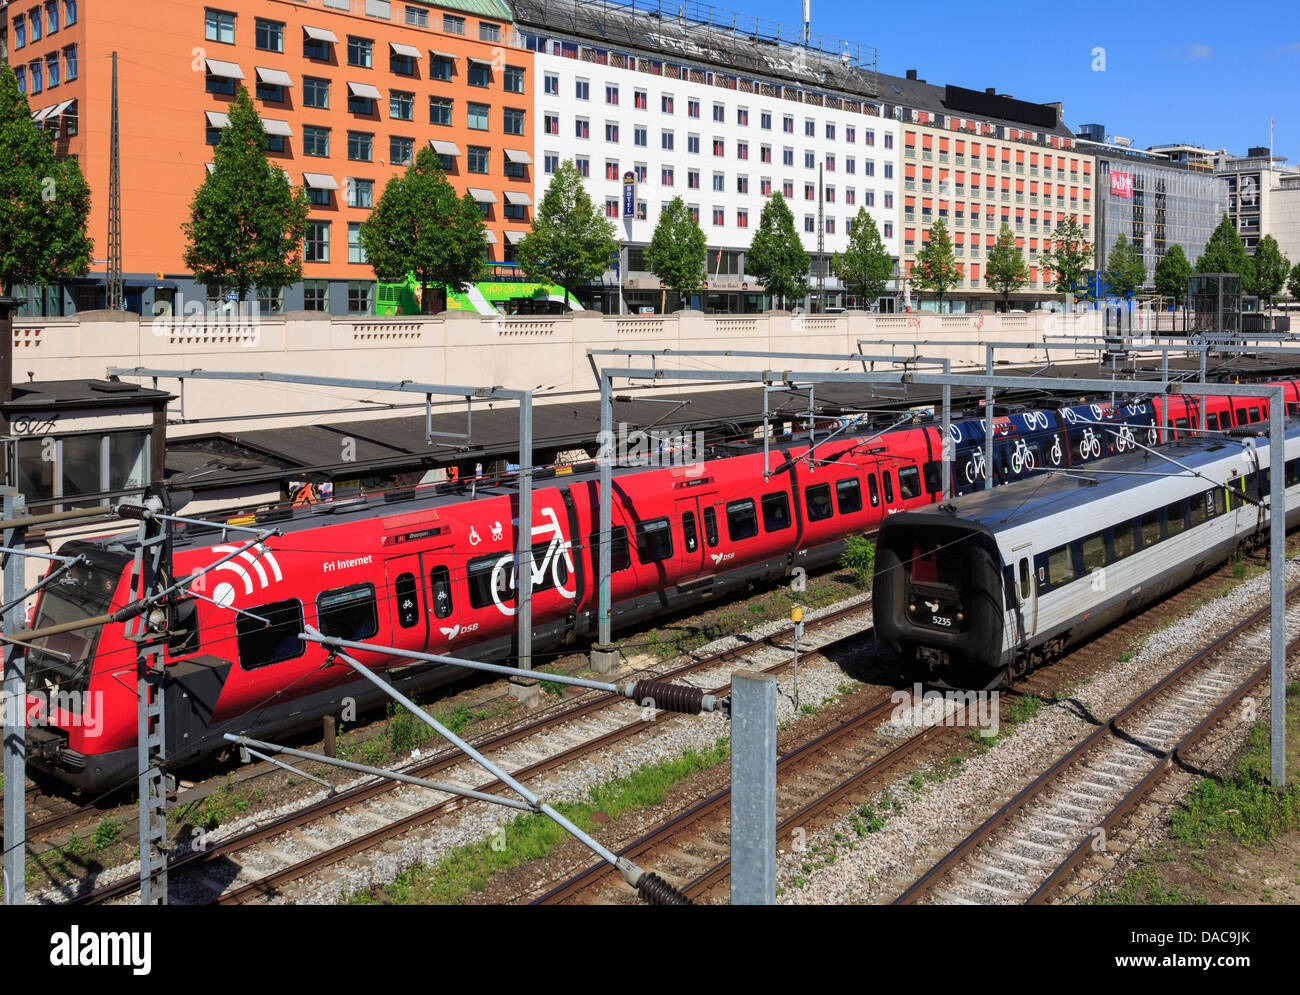 High view of S train with cycle carriage in Vesterport railway station, Copenhagen, Denmark, Scandinavia, Europe Stock Photo